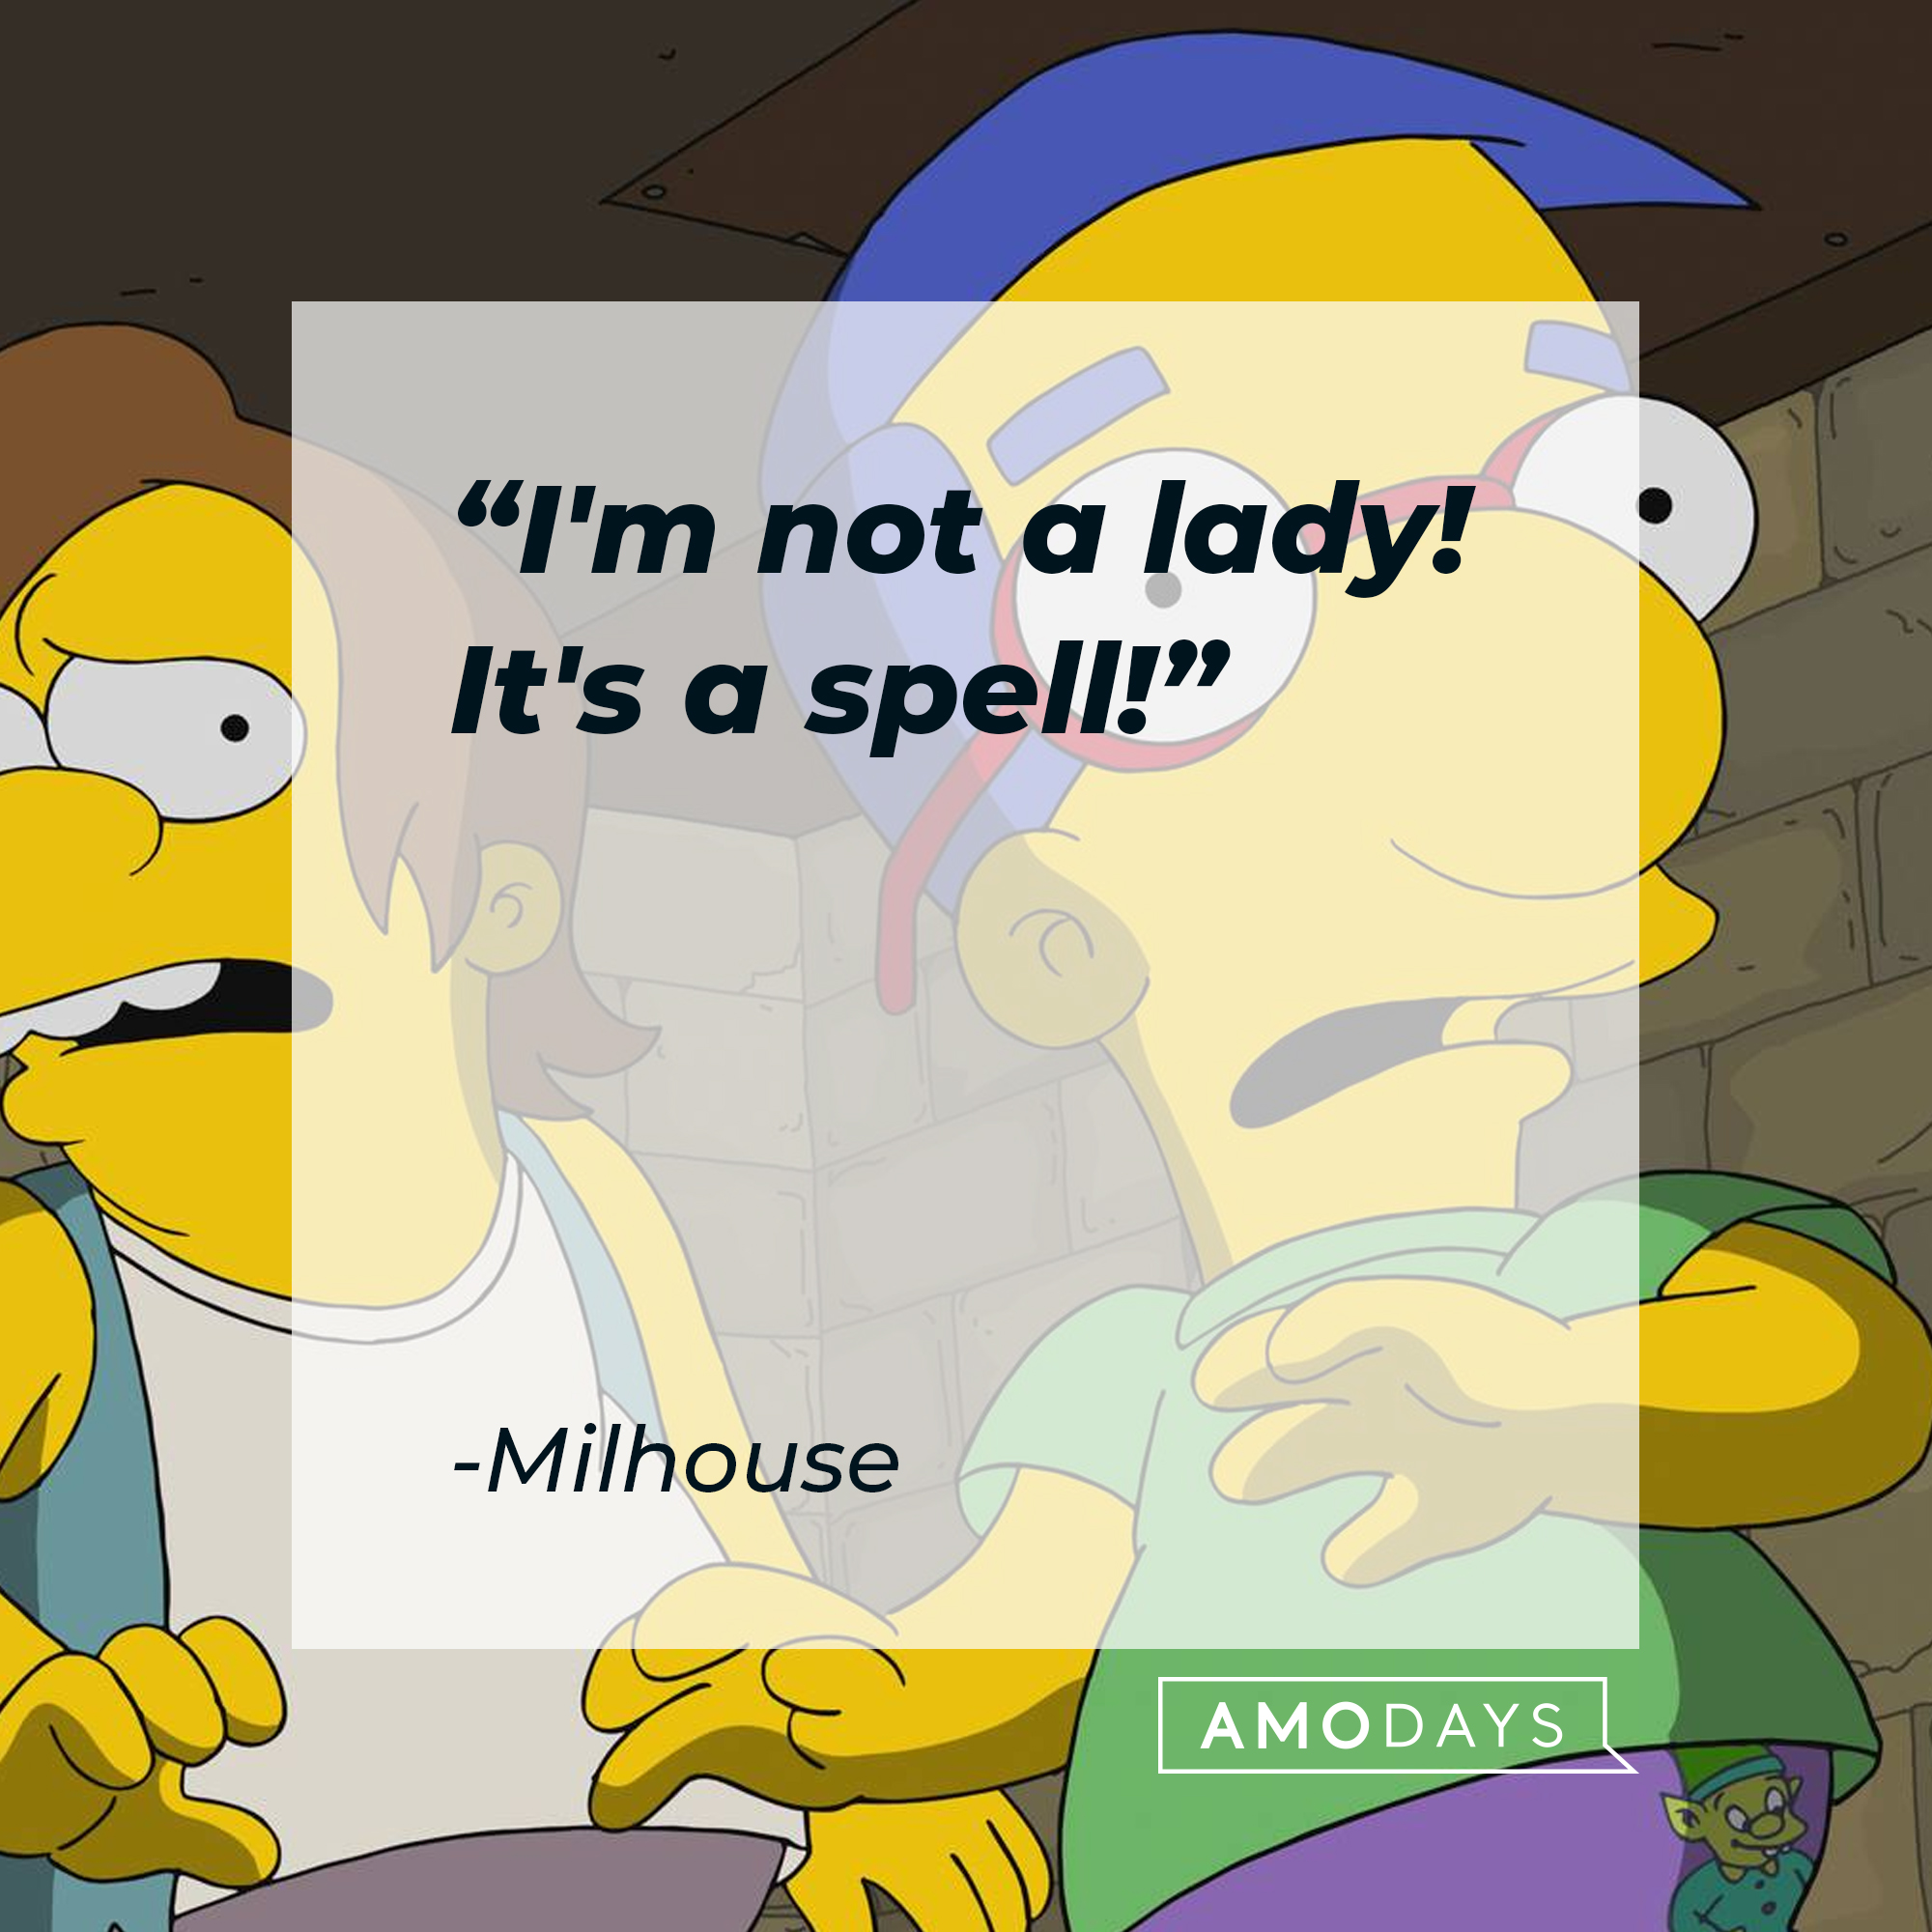 Nelson Mandela Muntz and Milhouse, with Milhouse's quote: “I'm not a lady! It's a spell!” | Source: facebook.com/TheSimpsons